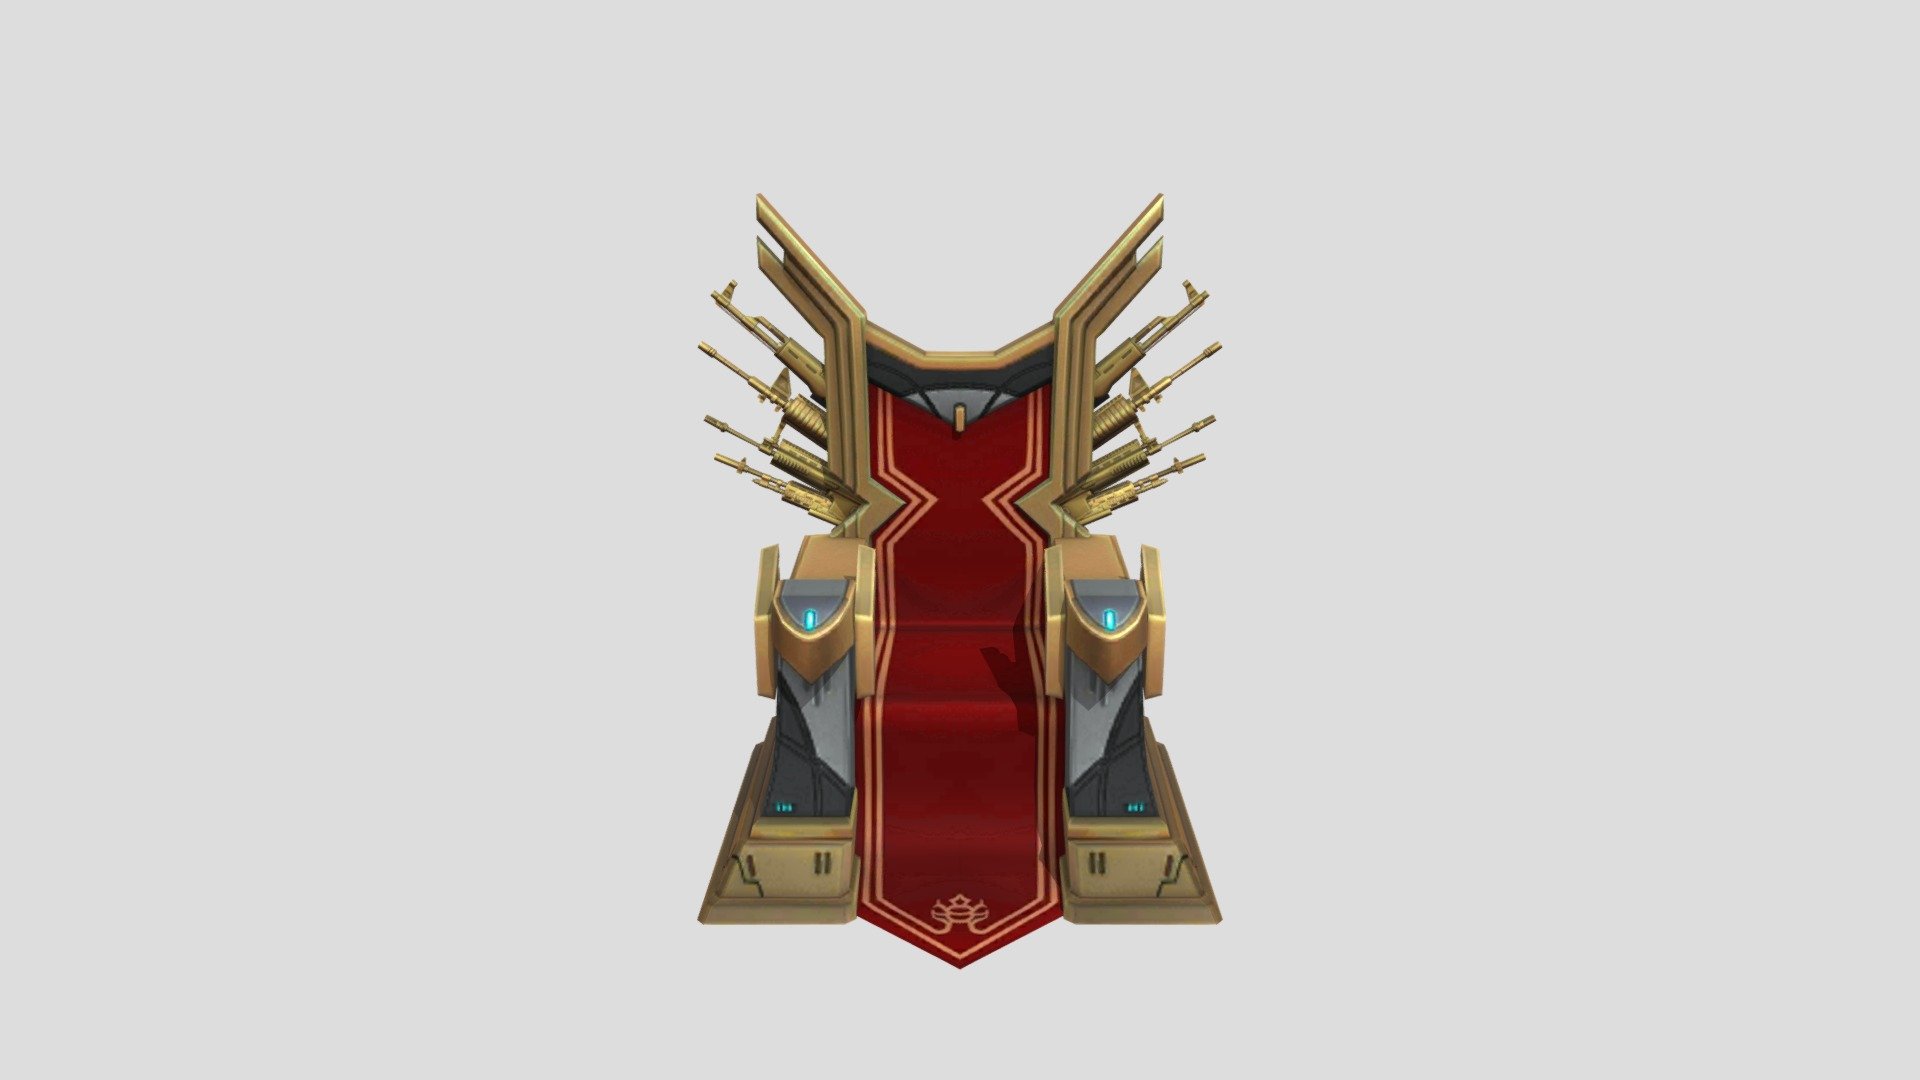 Thanks for visit my model - Free fire King throne chair 3d model - Download Free 3D model by panditharshit112 3d model